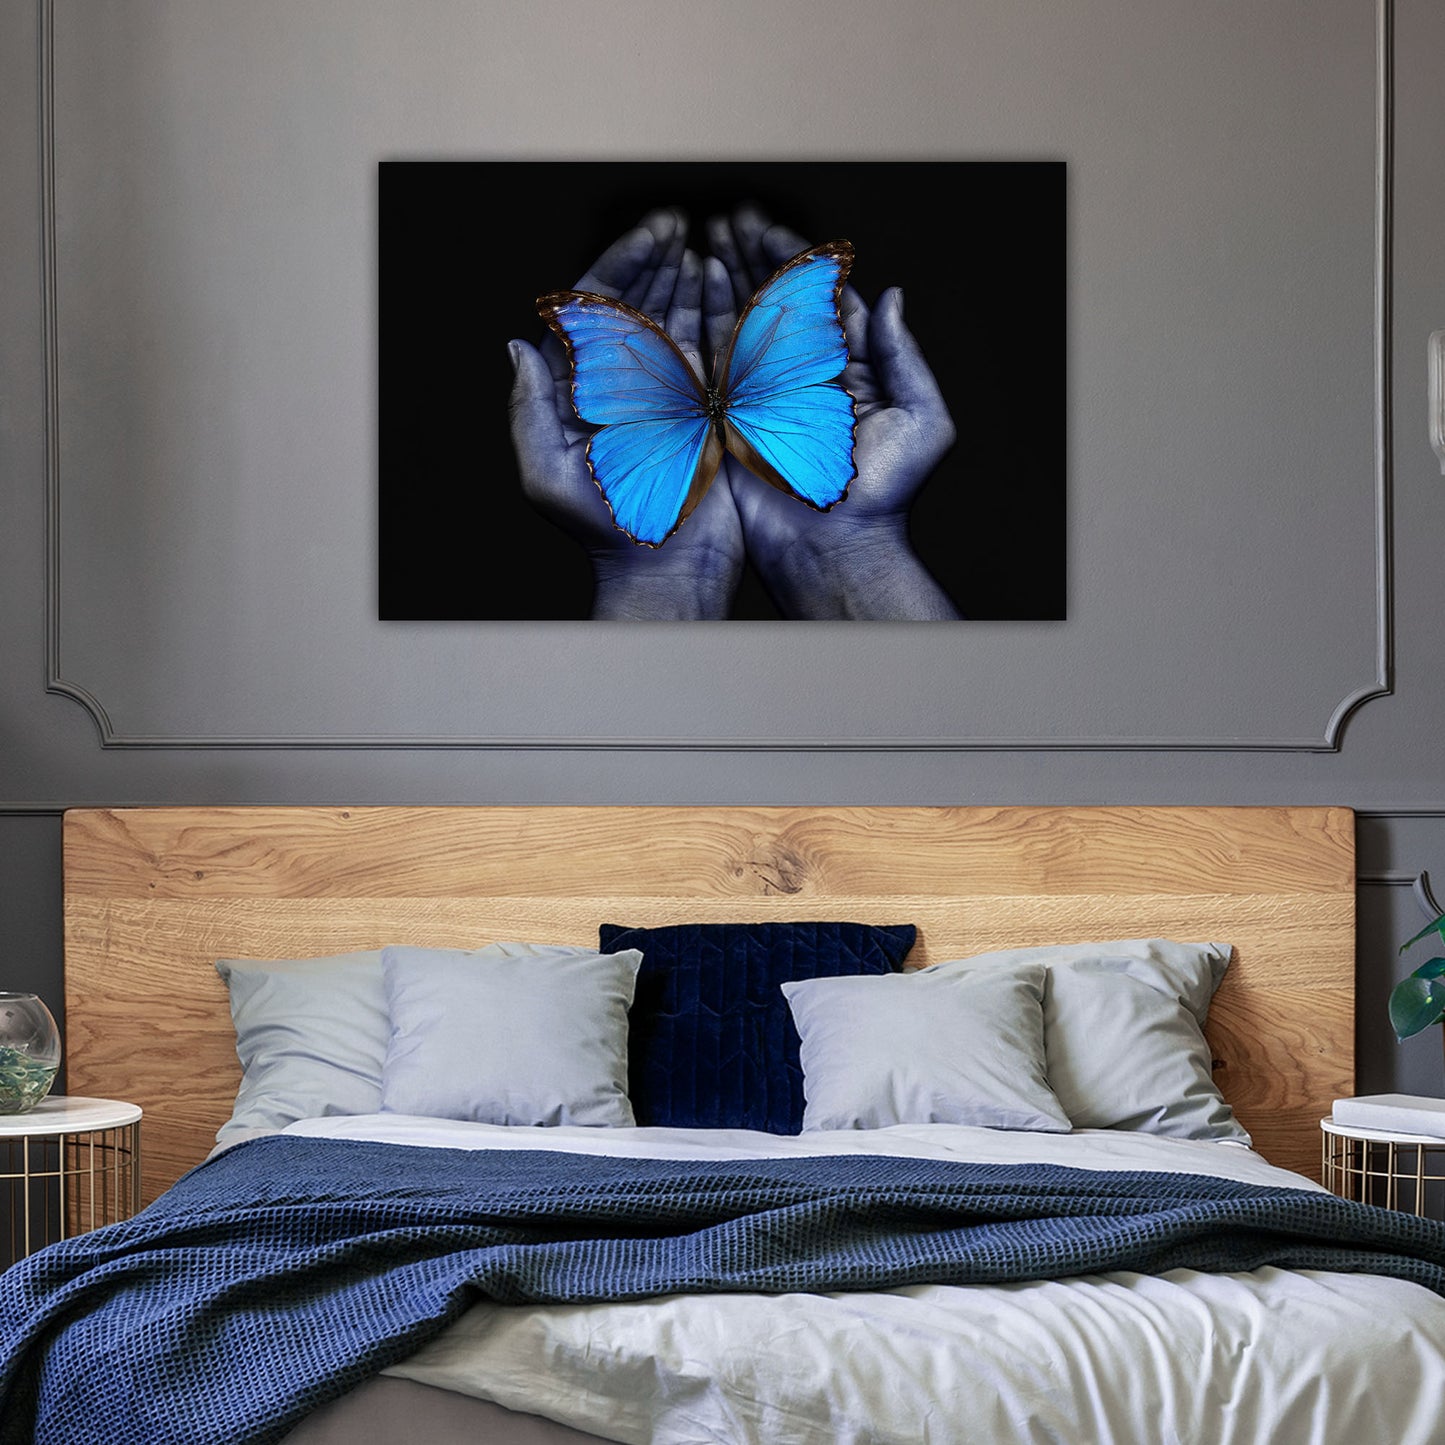 Butterfly in Hands Glass Wall Art 48"x32" - Expo Home Decor